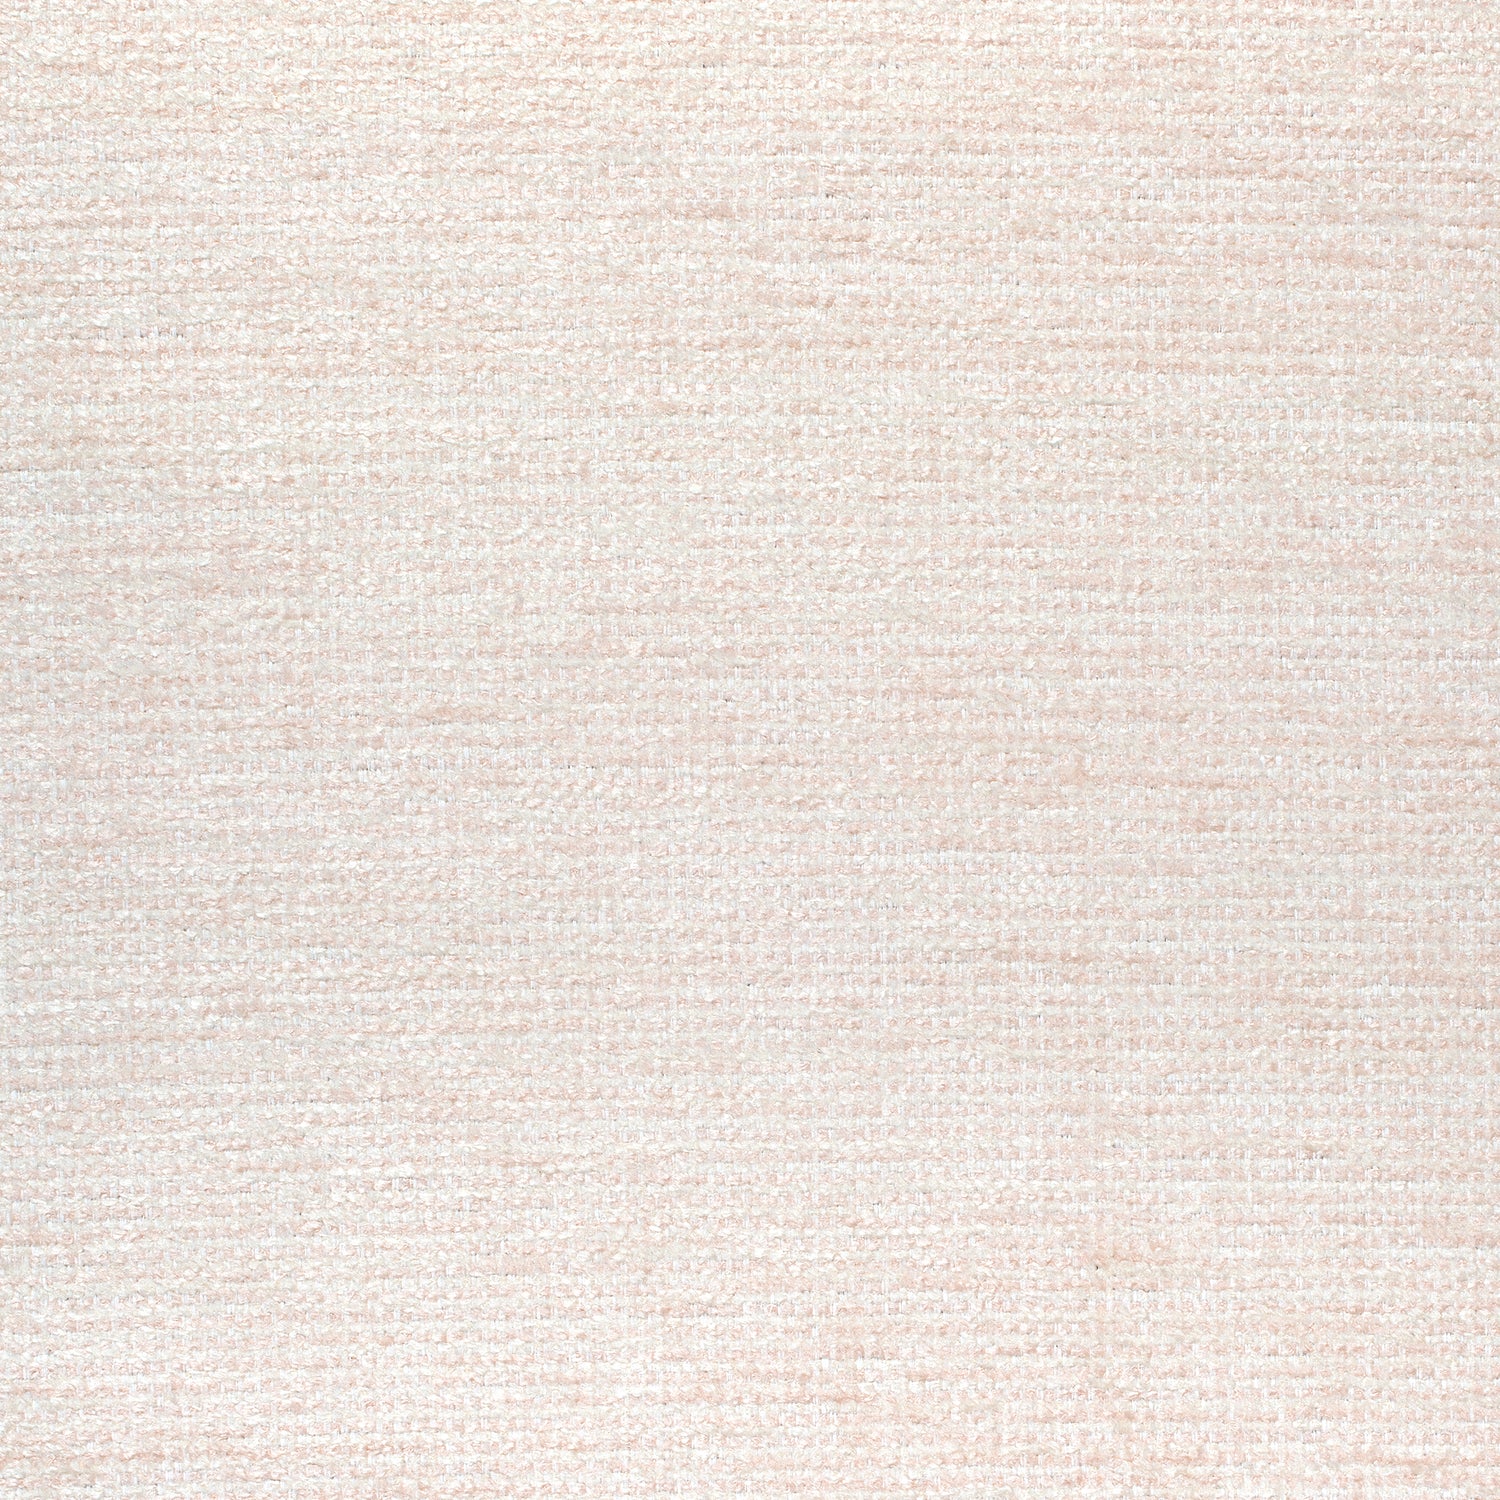 Milo fabric in blush color - pattern number W73317 - by Thibaut in the Nomad collection